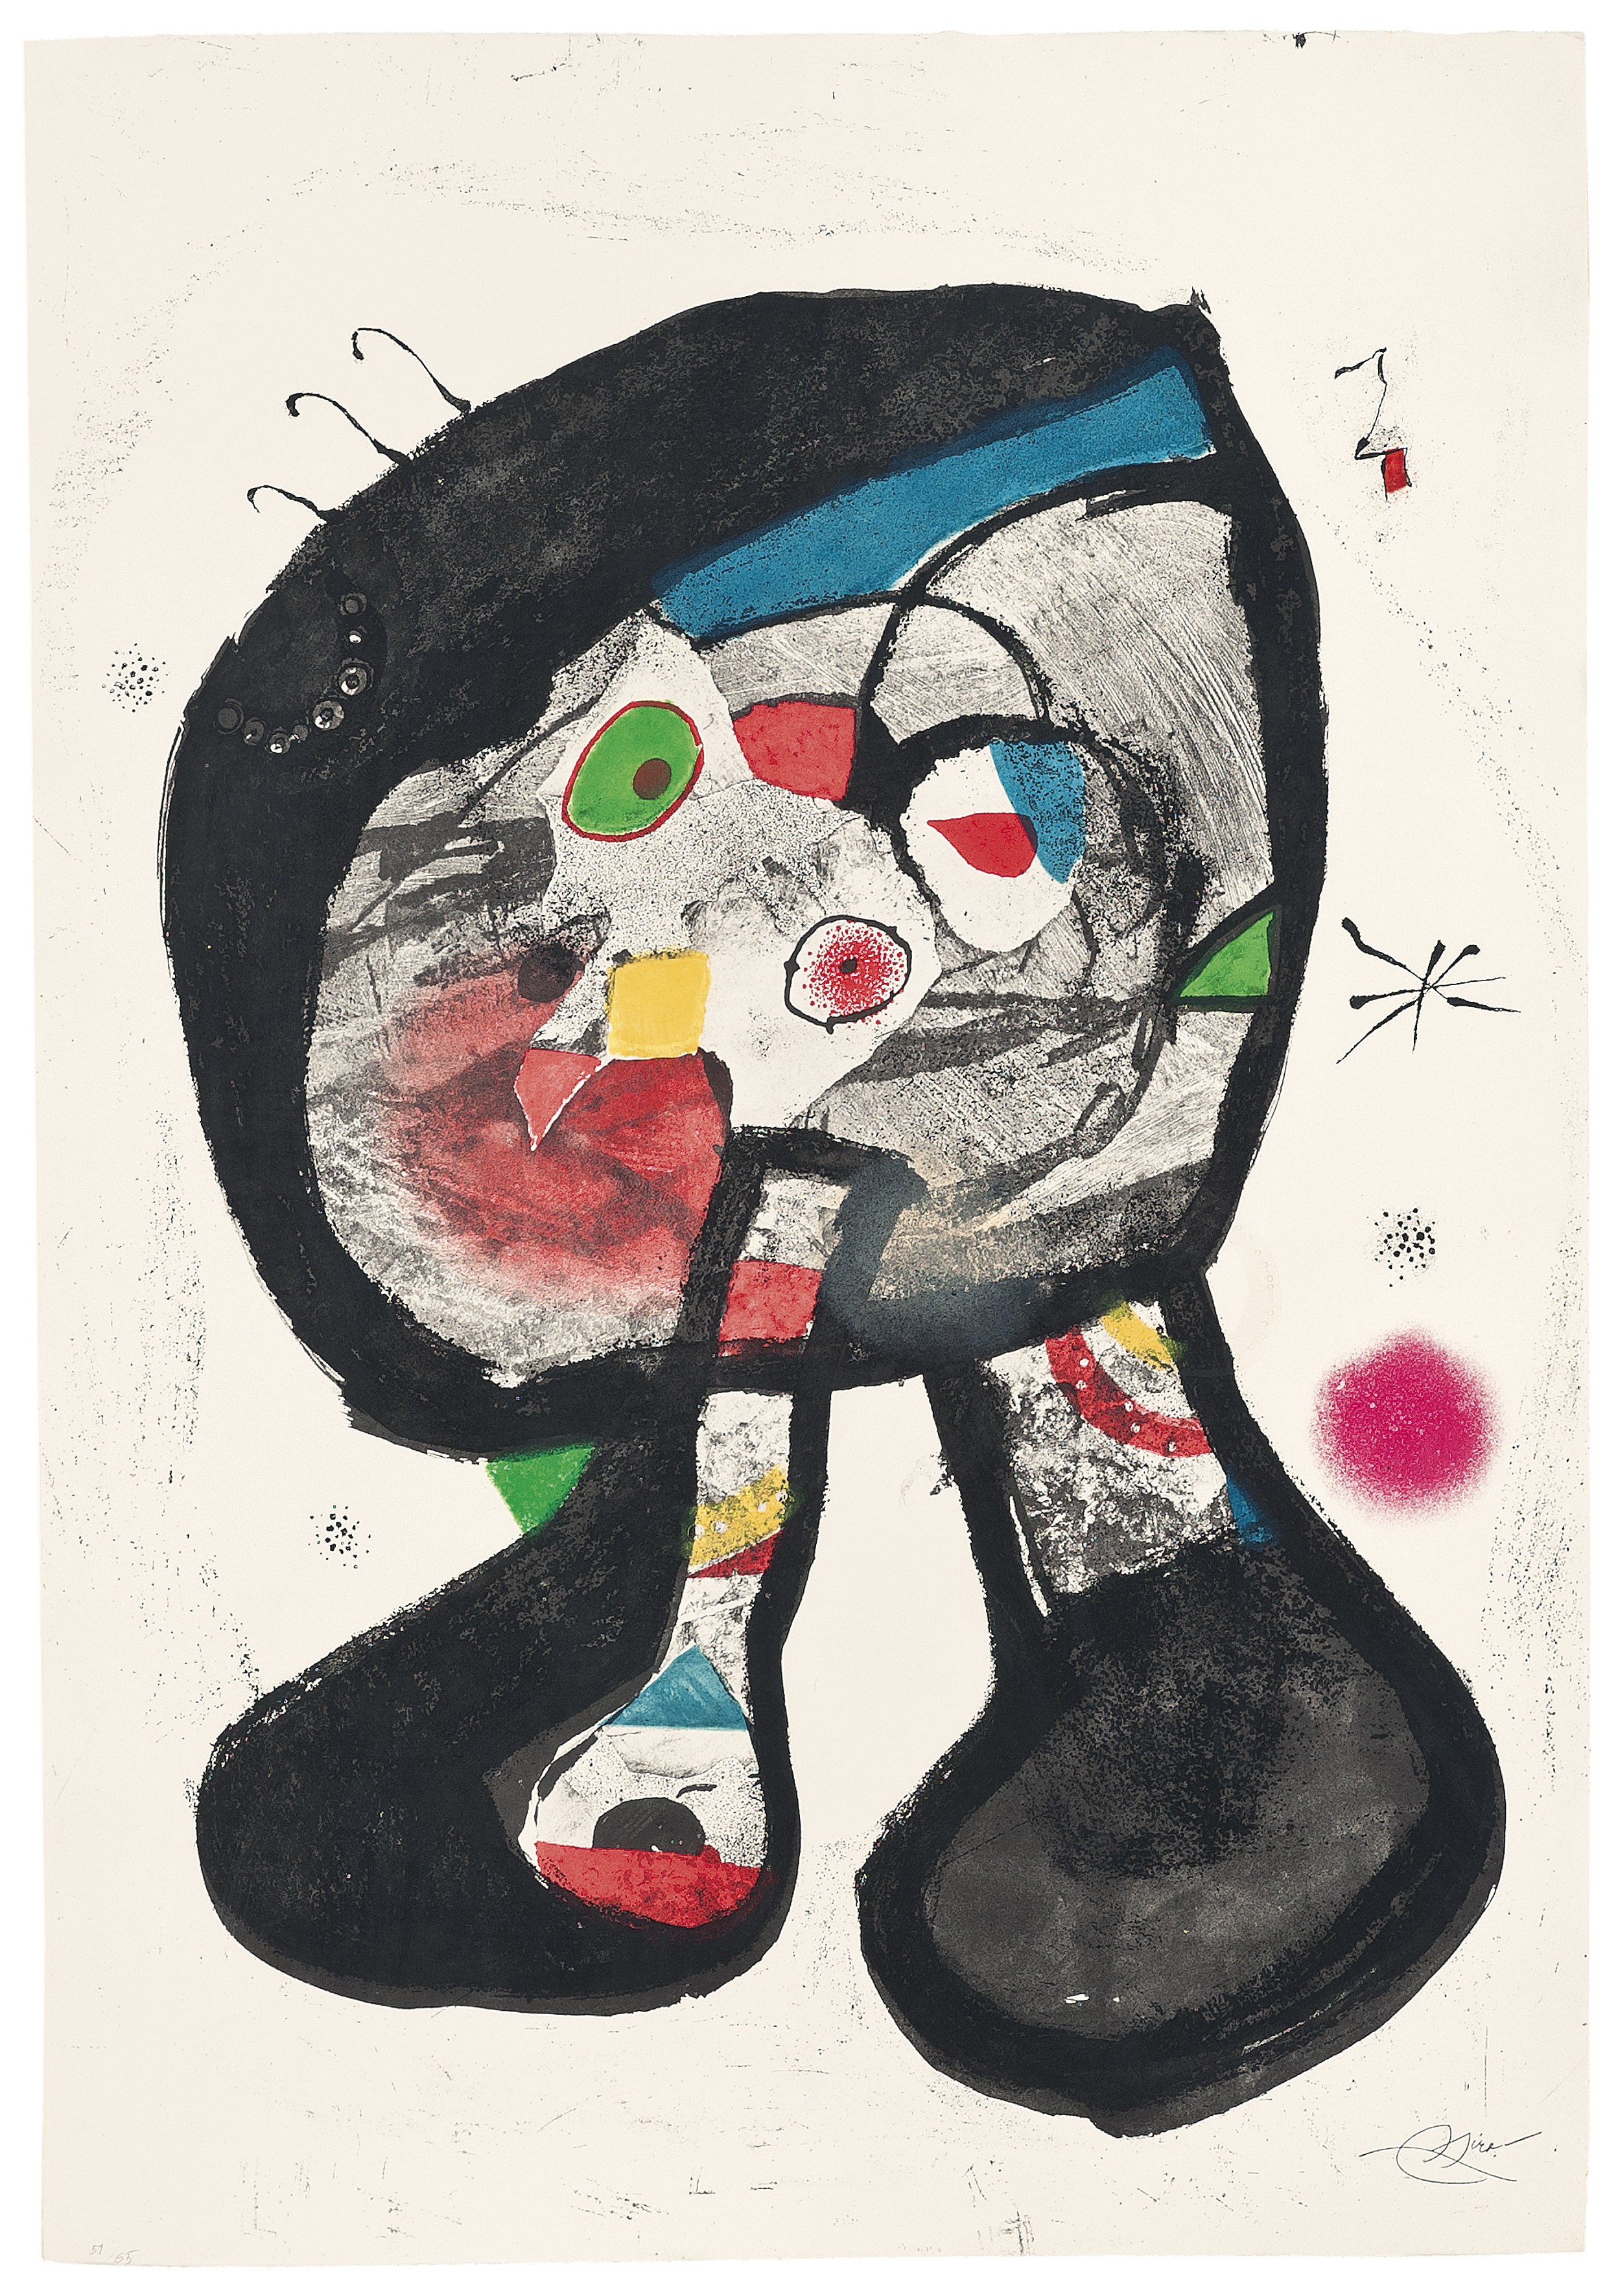 Miró's painting 'Le Fantôme de l'atelier' was auctioned at Christies within the charity project 'Joan Miró & Refugees' (by Christie's Images Ltd)